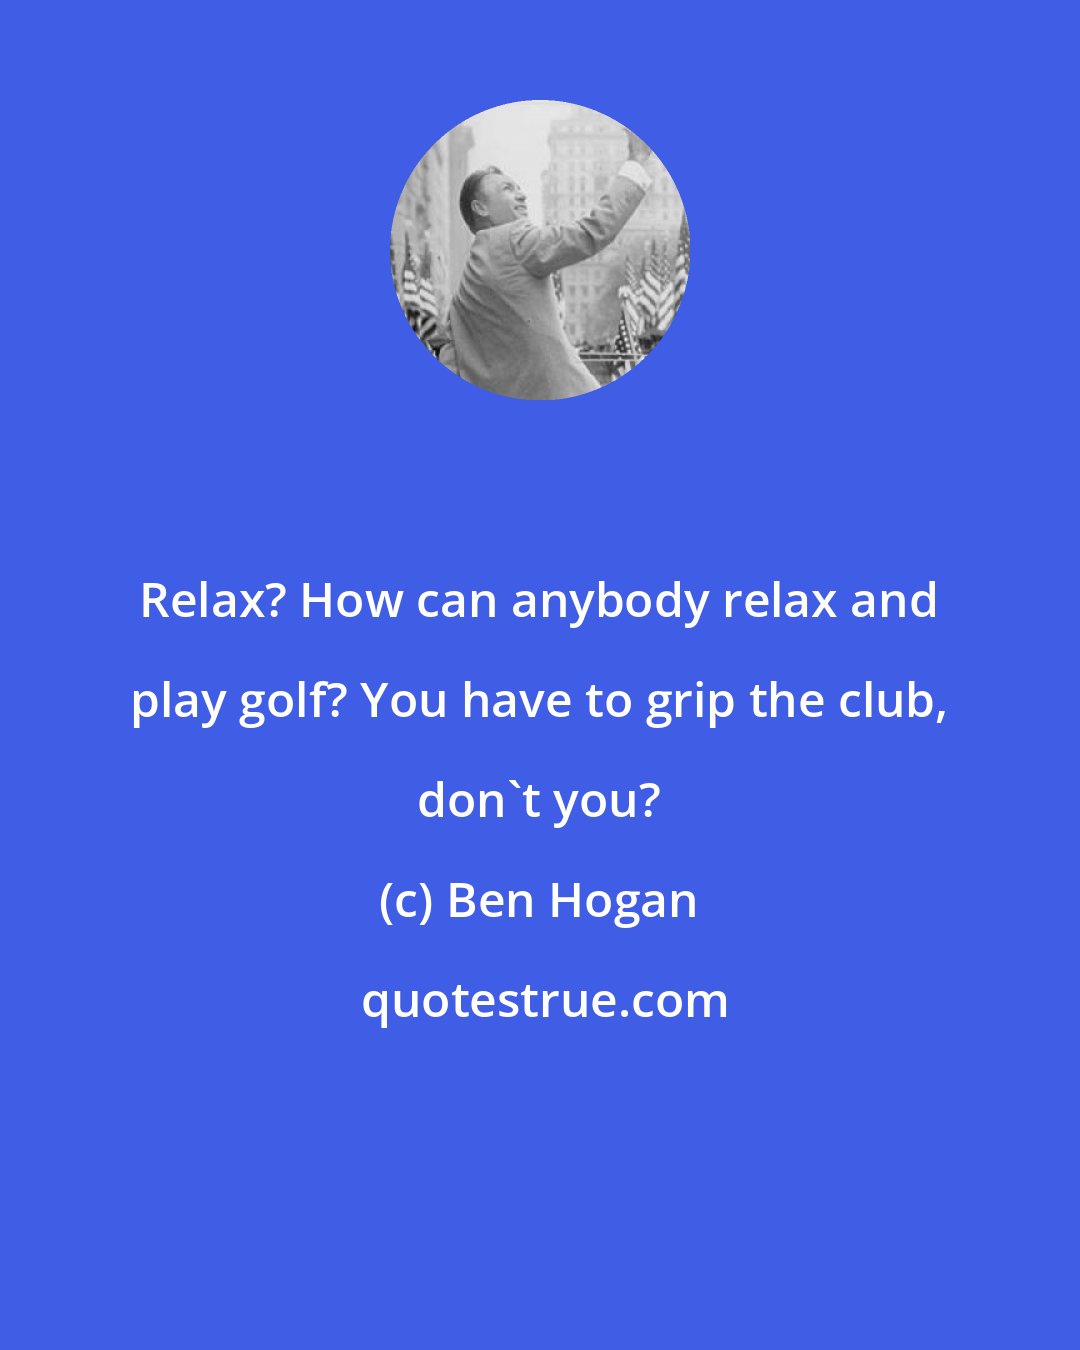 Ben Hogan: Relax? How can anybody relax and play golf? You have to grip the club, don't you?